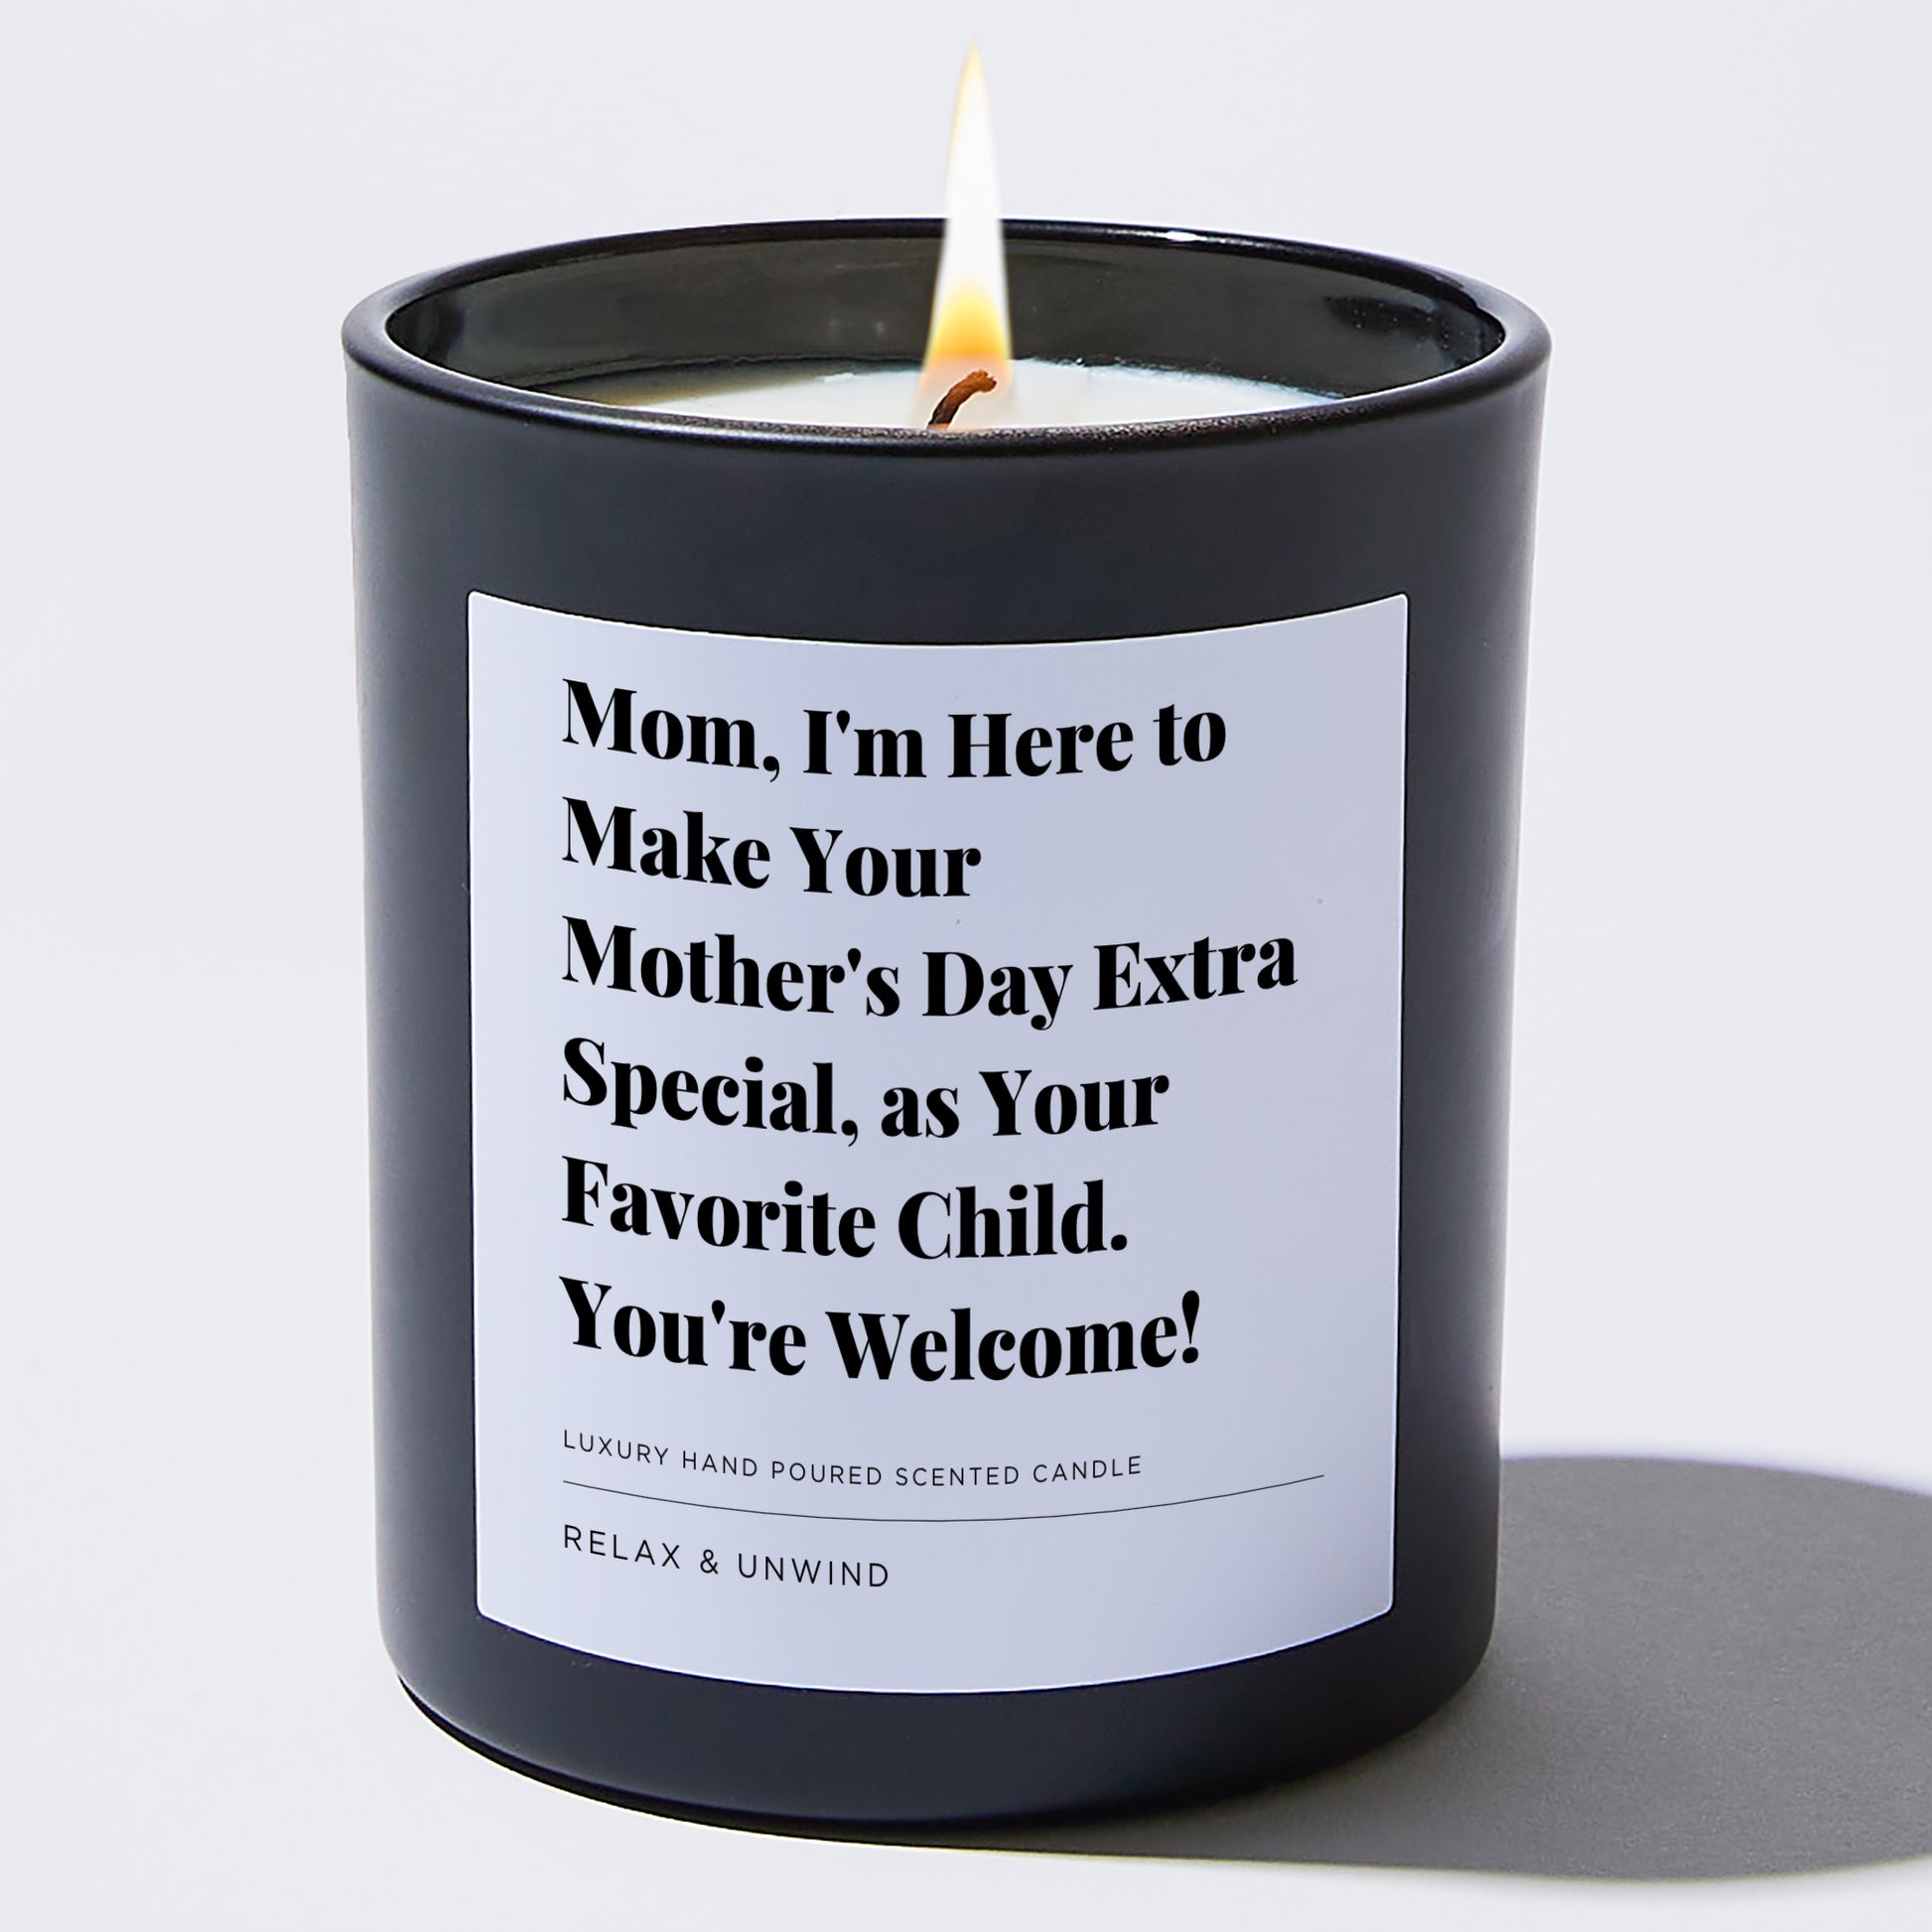 Gift for Mom Mom, I'm here to make your Mother's Day extra special, as your favorite child. You're welcome!